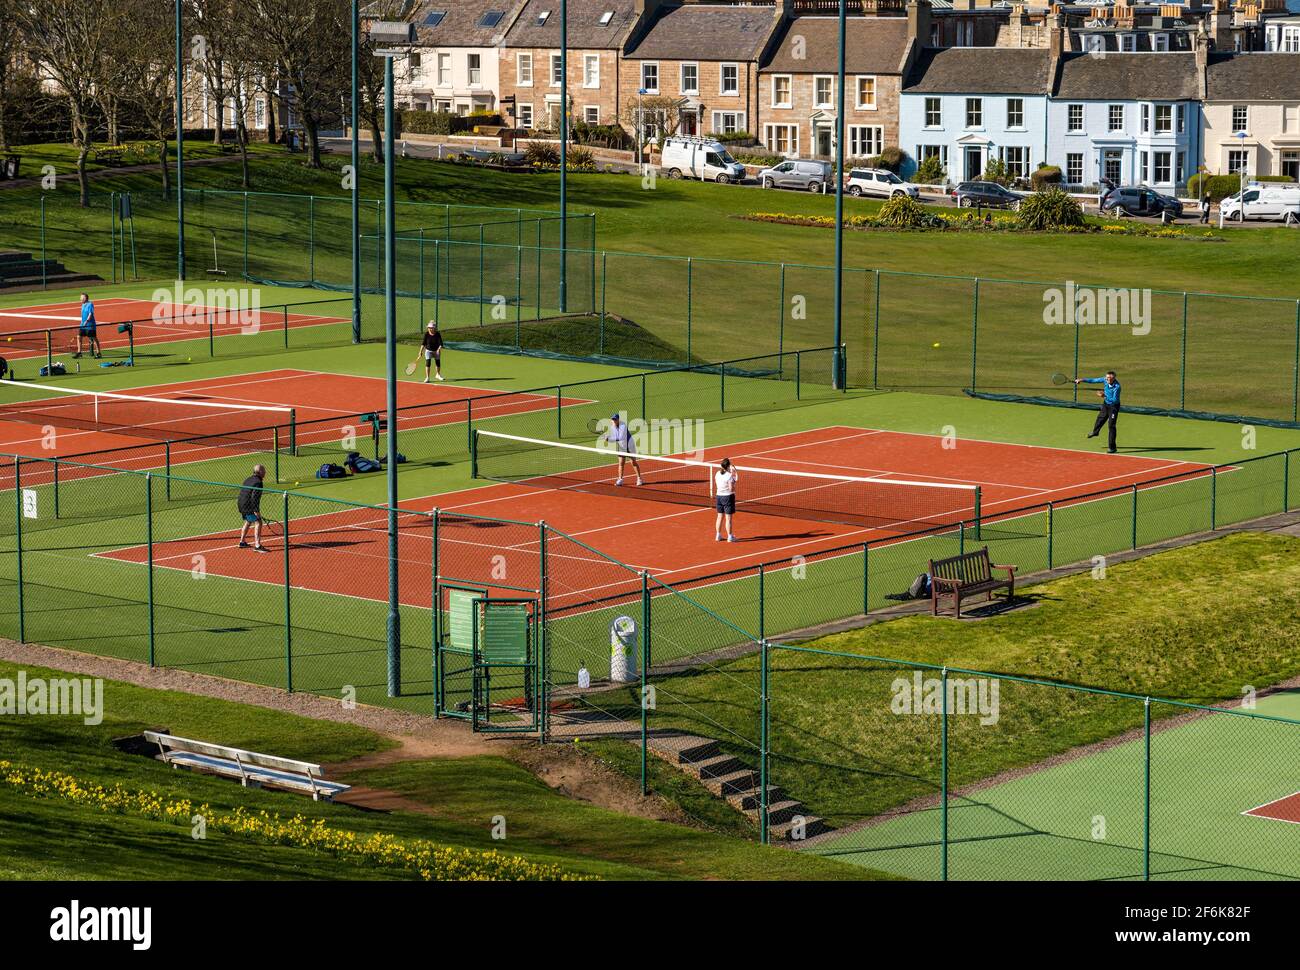 North Berwick, East Lothian, Scotland, United Kingdom, 1st April 2021. UK Weather: Spring sunshine. Pictured: the public tennis courts are busy with people enjoying a game of tennis the day before lockdown restrictions ease during the Covid-19 pandemic Stock Photo